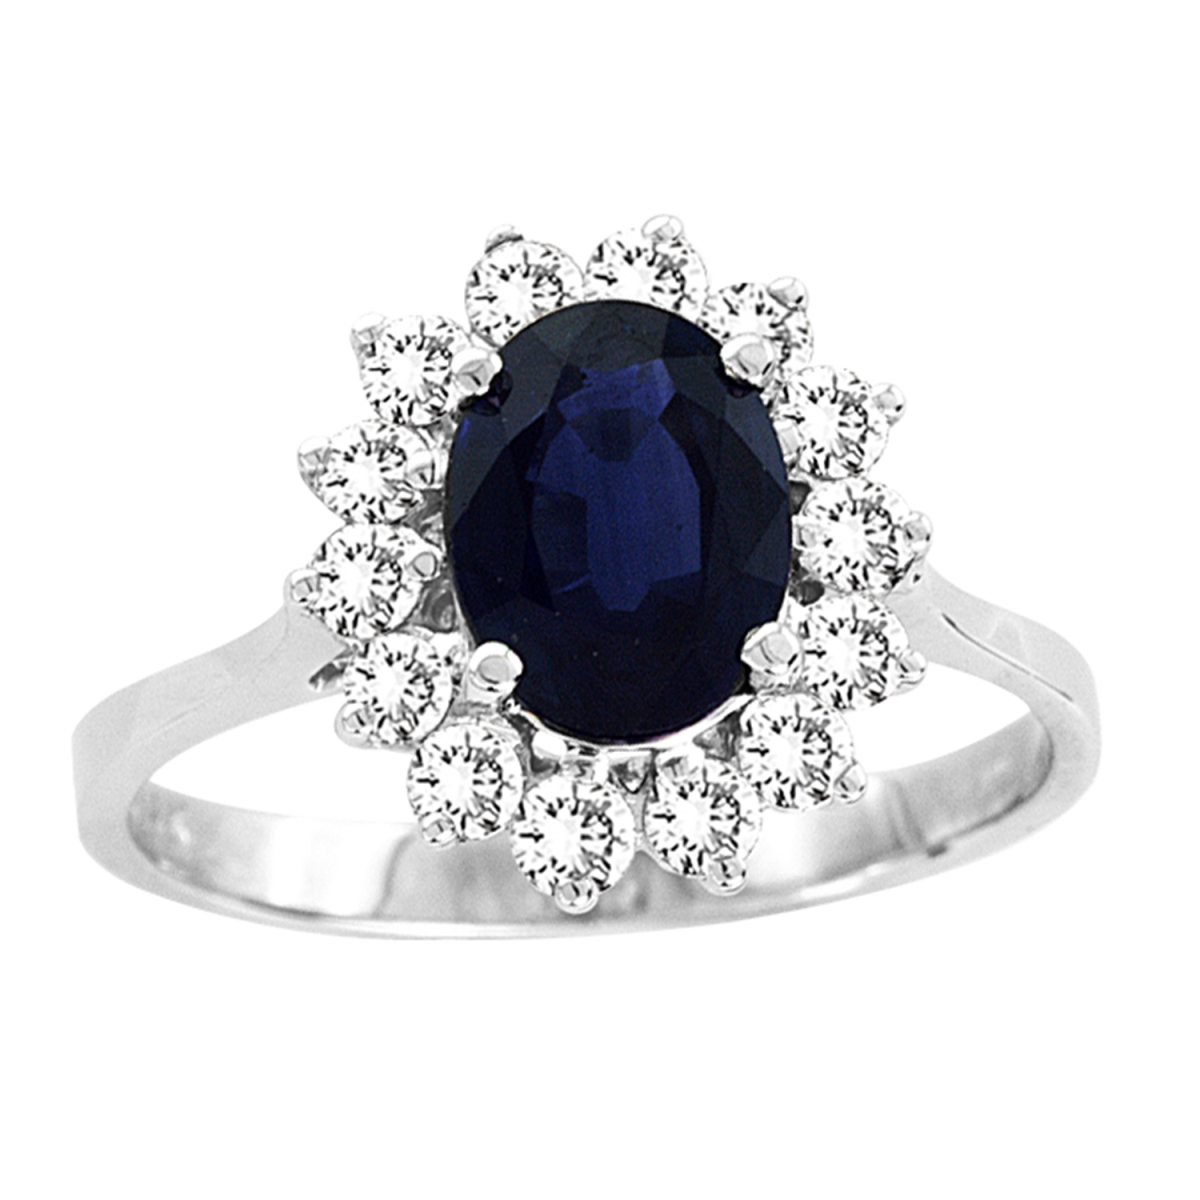 Picture of Louis Creations R1548SD-5.5 14K Gold Royal Collection 1.75 CTTW 8 x 6 mm 1.35 Carat Oval Sapphire Center Stone Natural Sapphire & Diamond Ring - Size 5.5